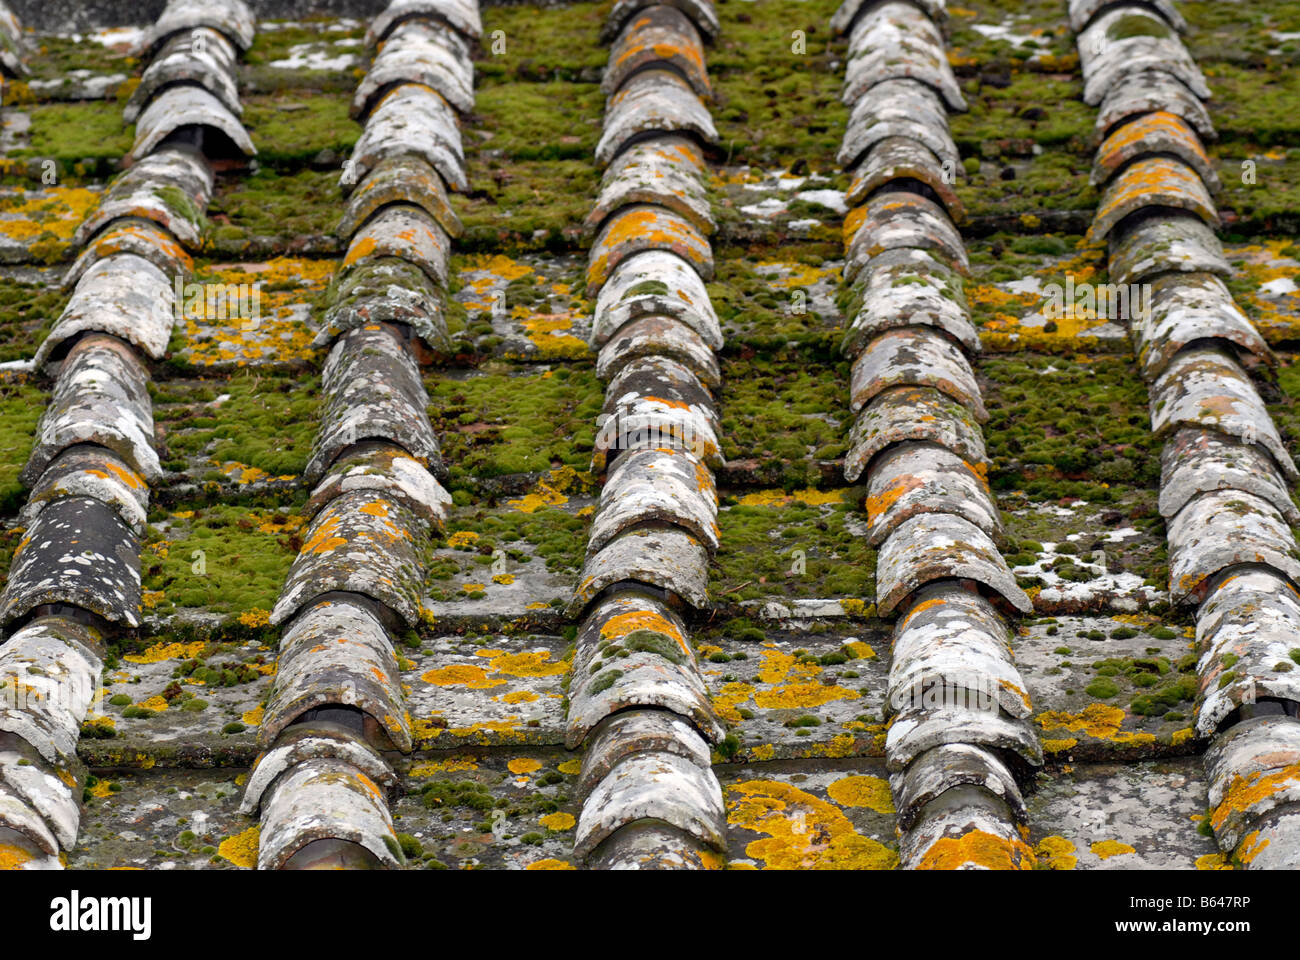 Old Tuscan roof tiles in Italy covered in yellow and green lichen and moss. Stock Photo